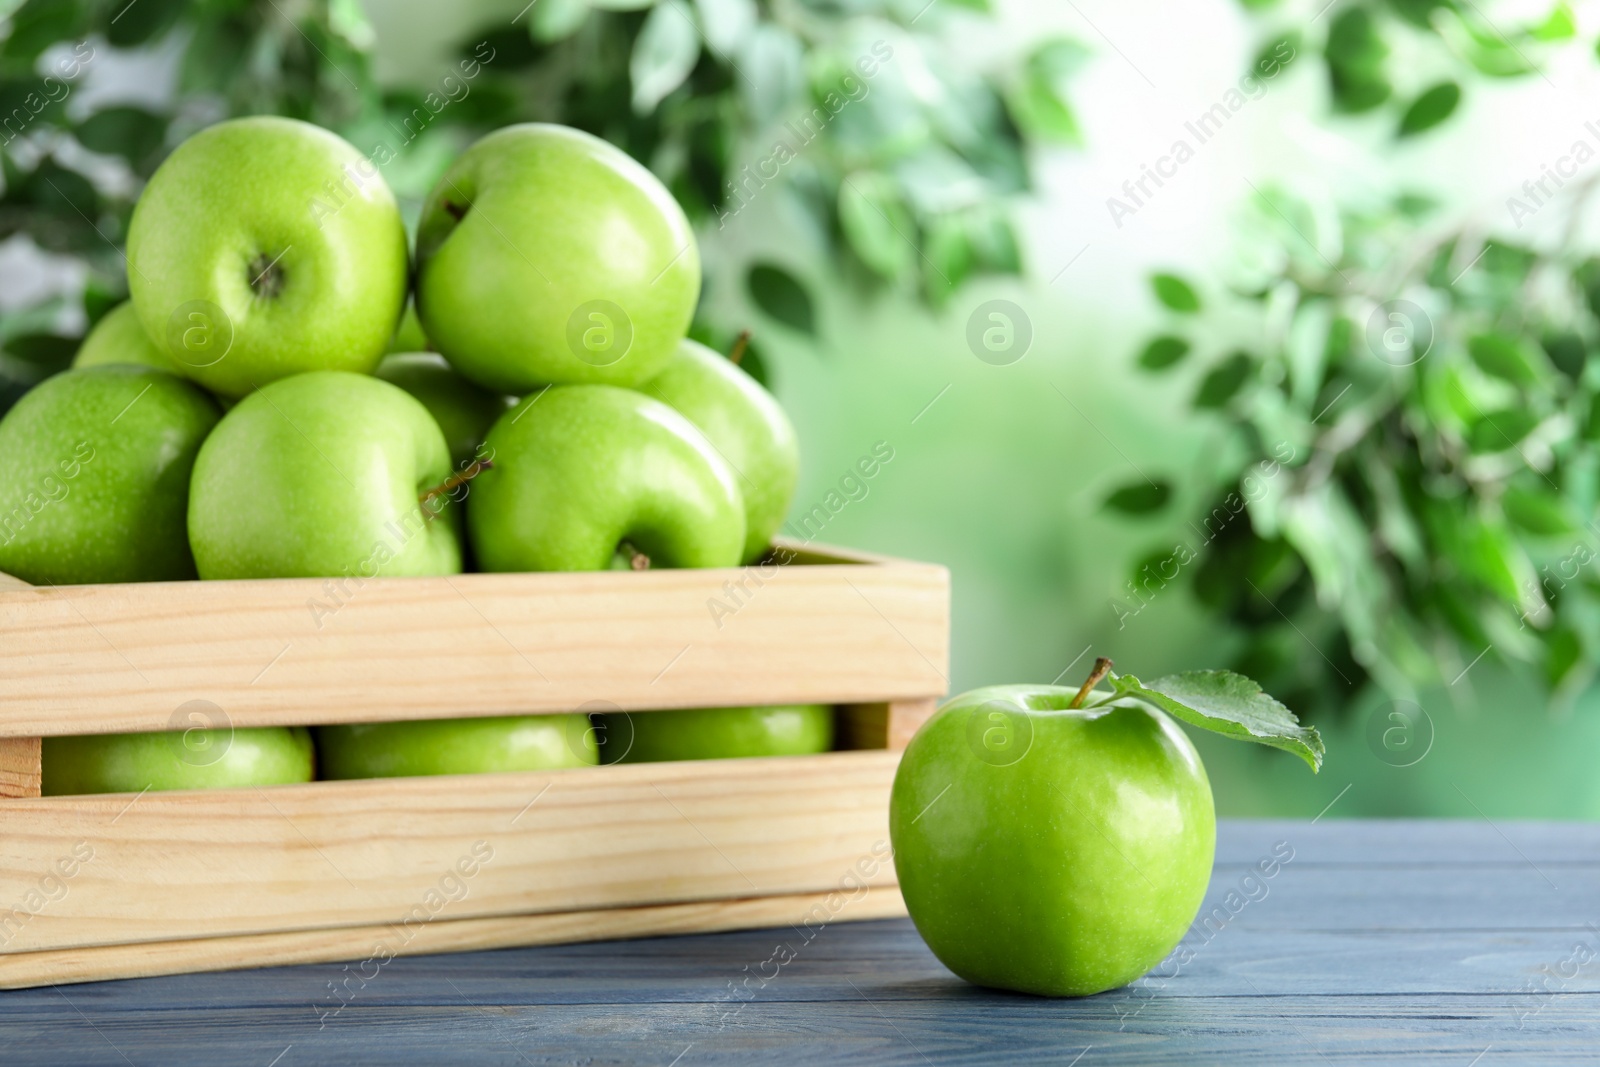 Photo of Ripe green apples in crate on blue wooden table against blurred background. Space for text